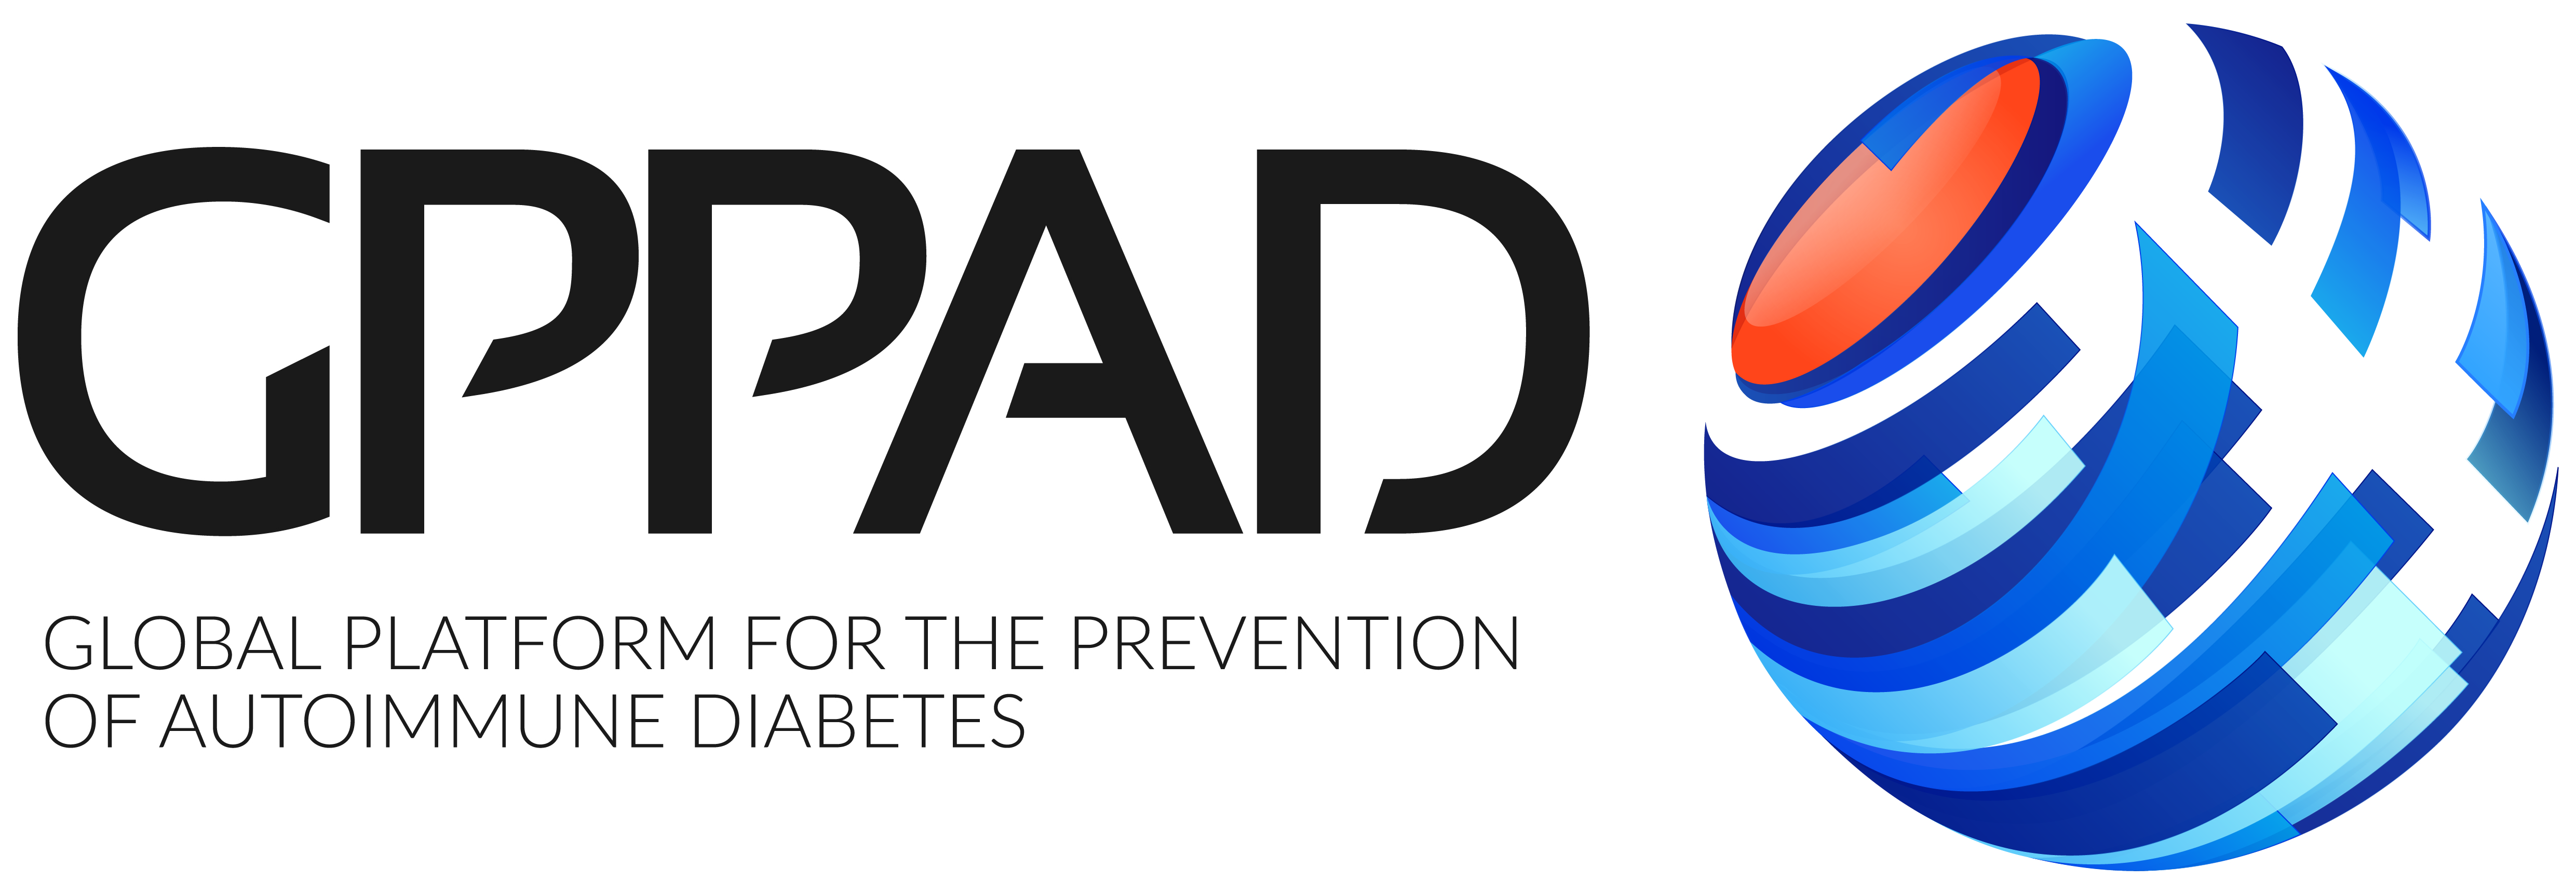 A way to prevent type 1 diabetes?